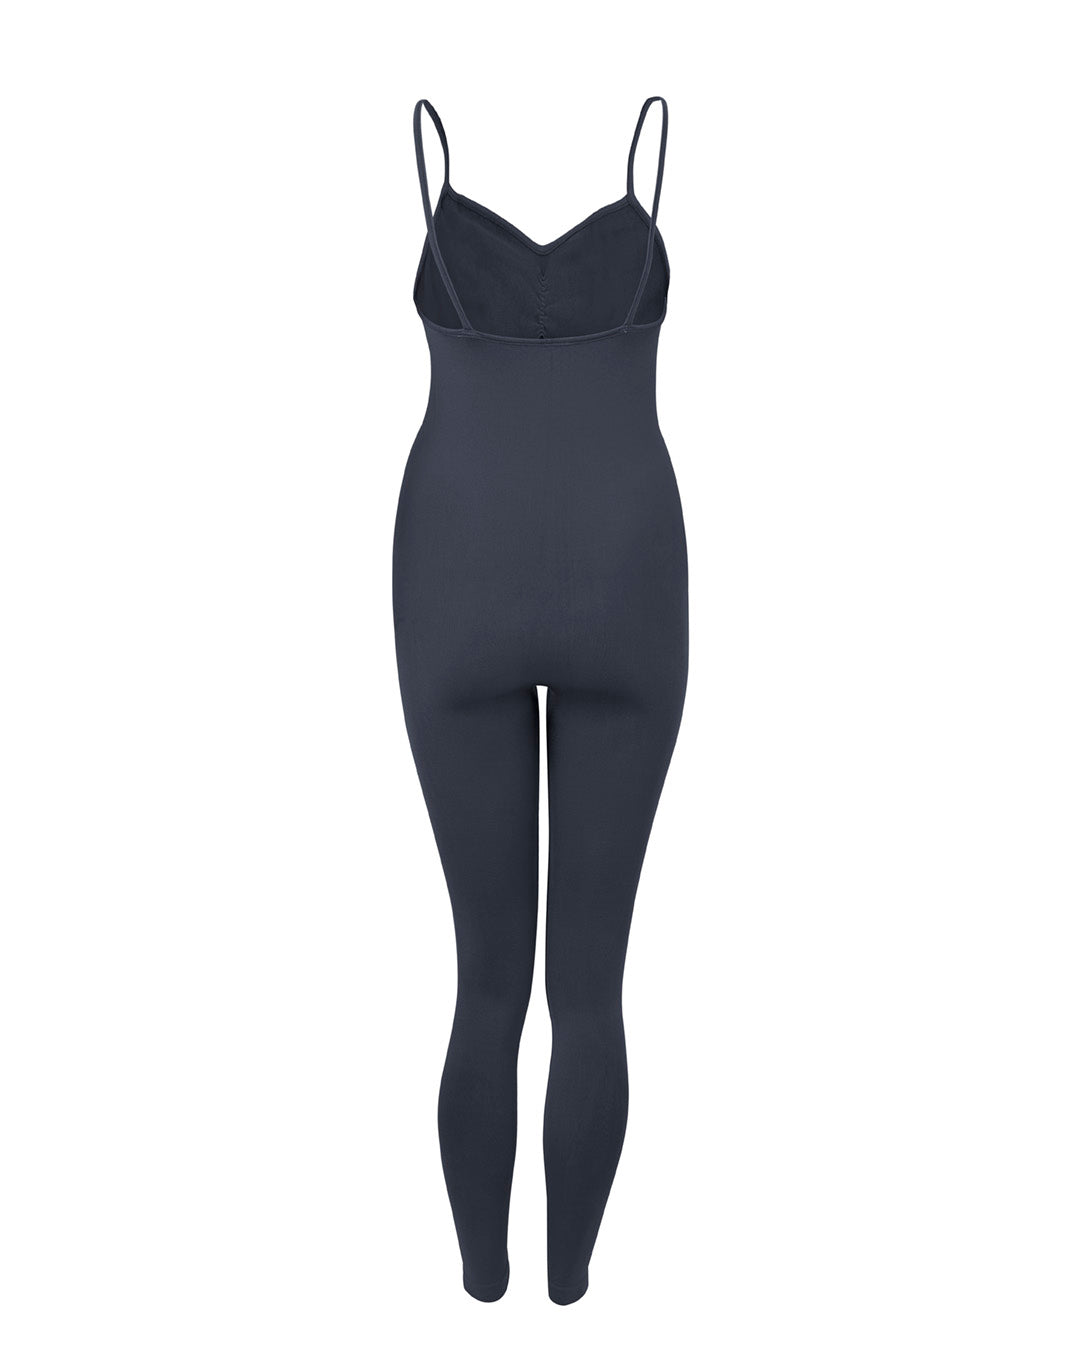 Balanced - Navy multi-functional: swimwear, activewear, underwear. Fabric made to maximise movement and flatter the figure.